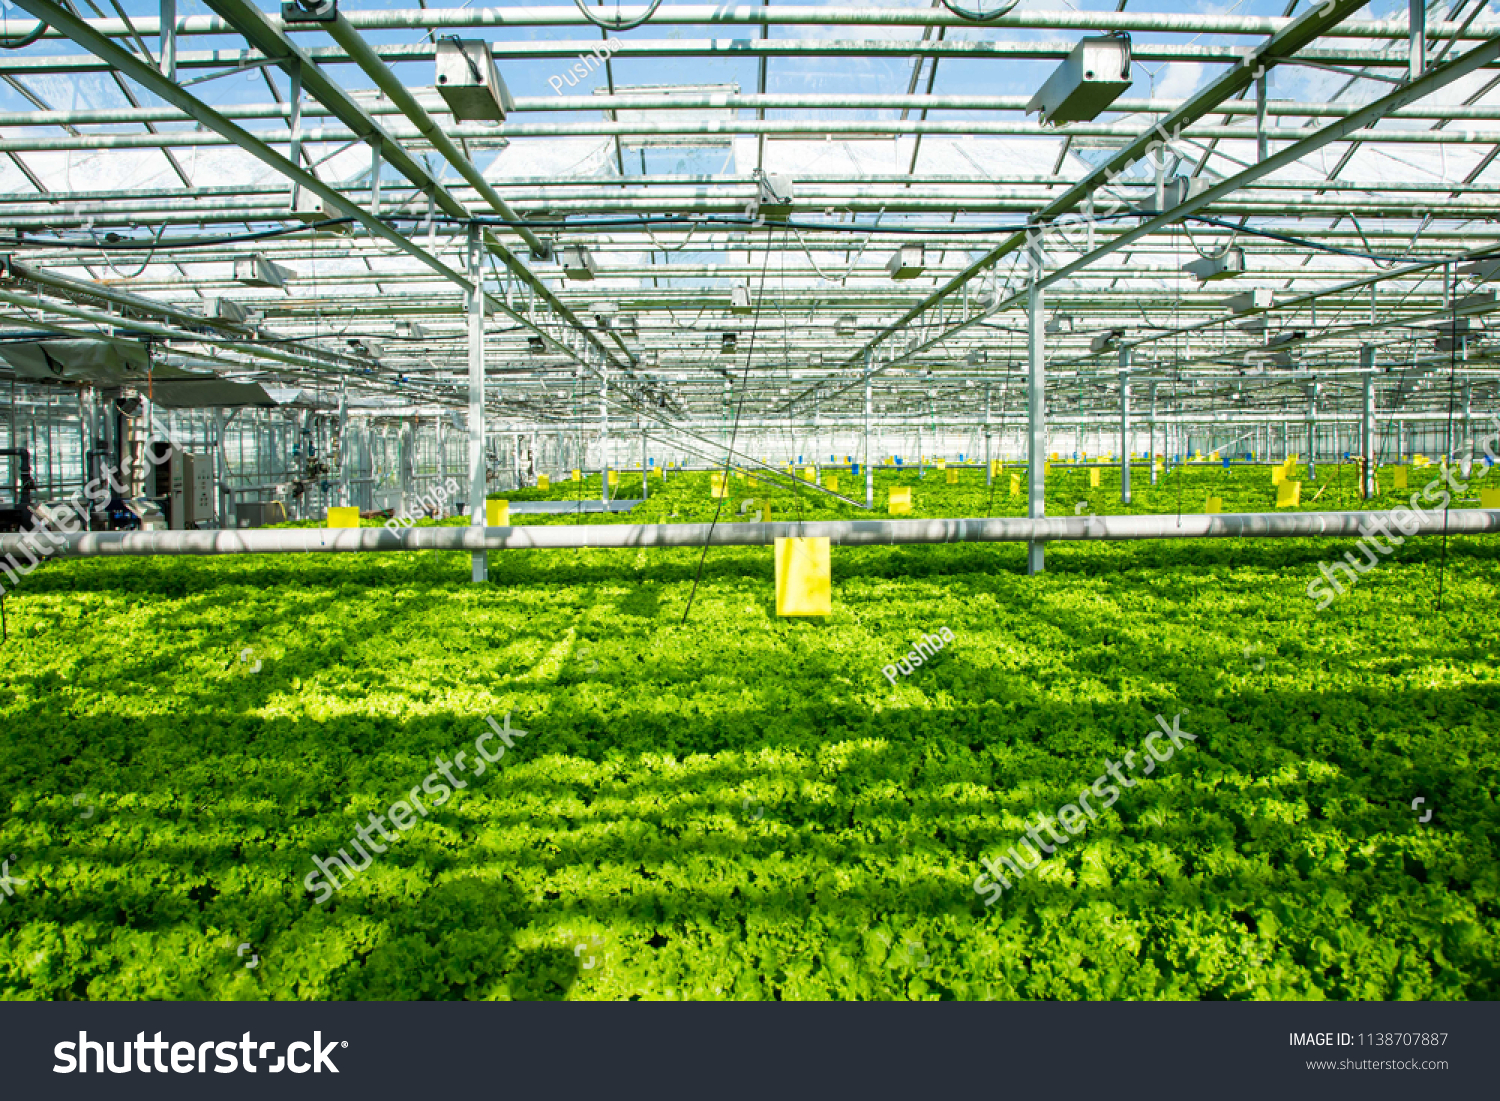 photo of the greenhouse and leaf lettuce growing in it #1138707887